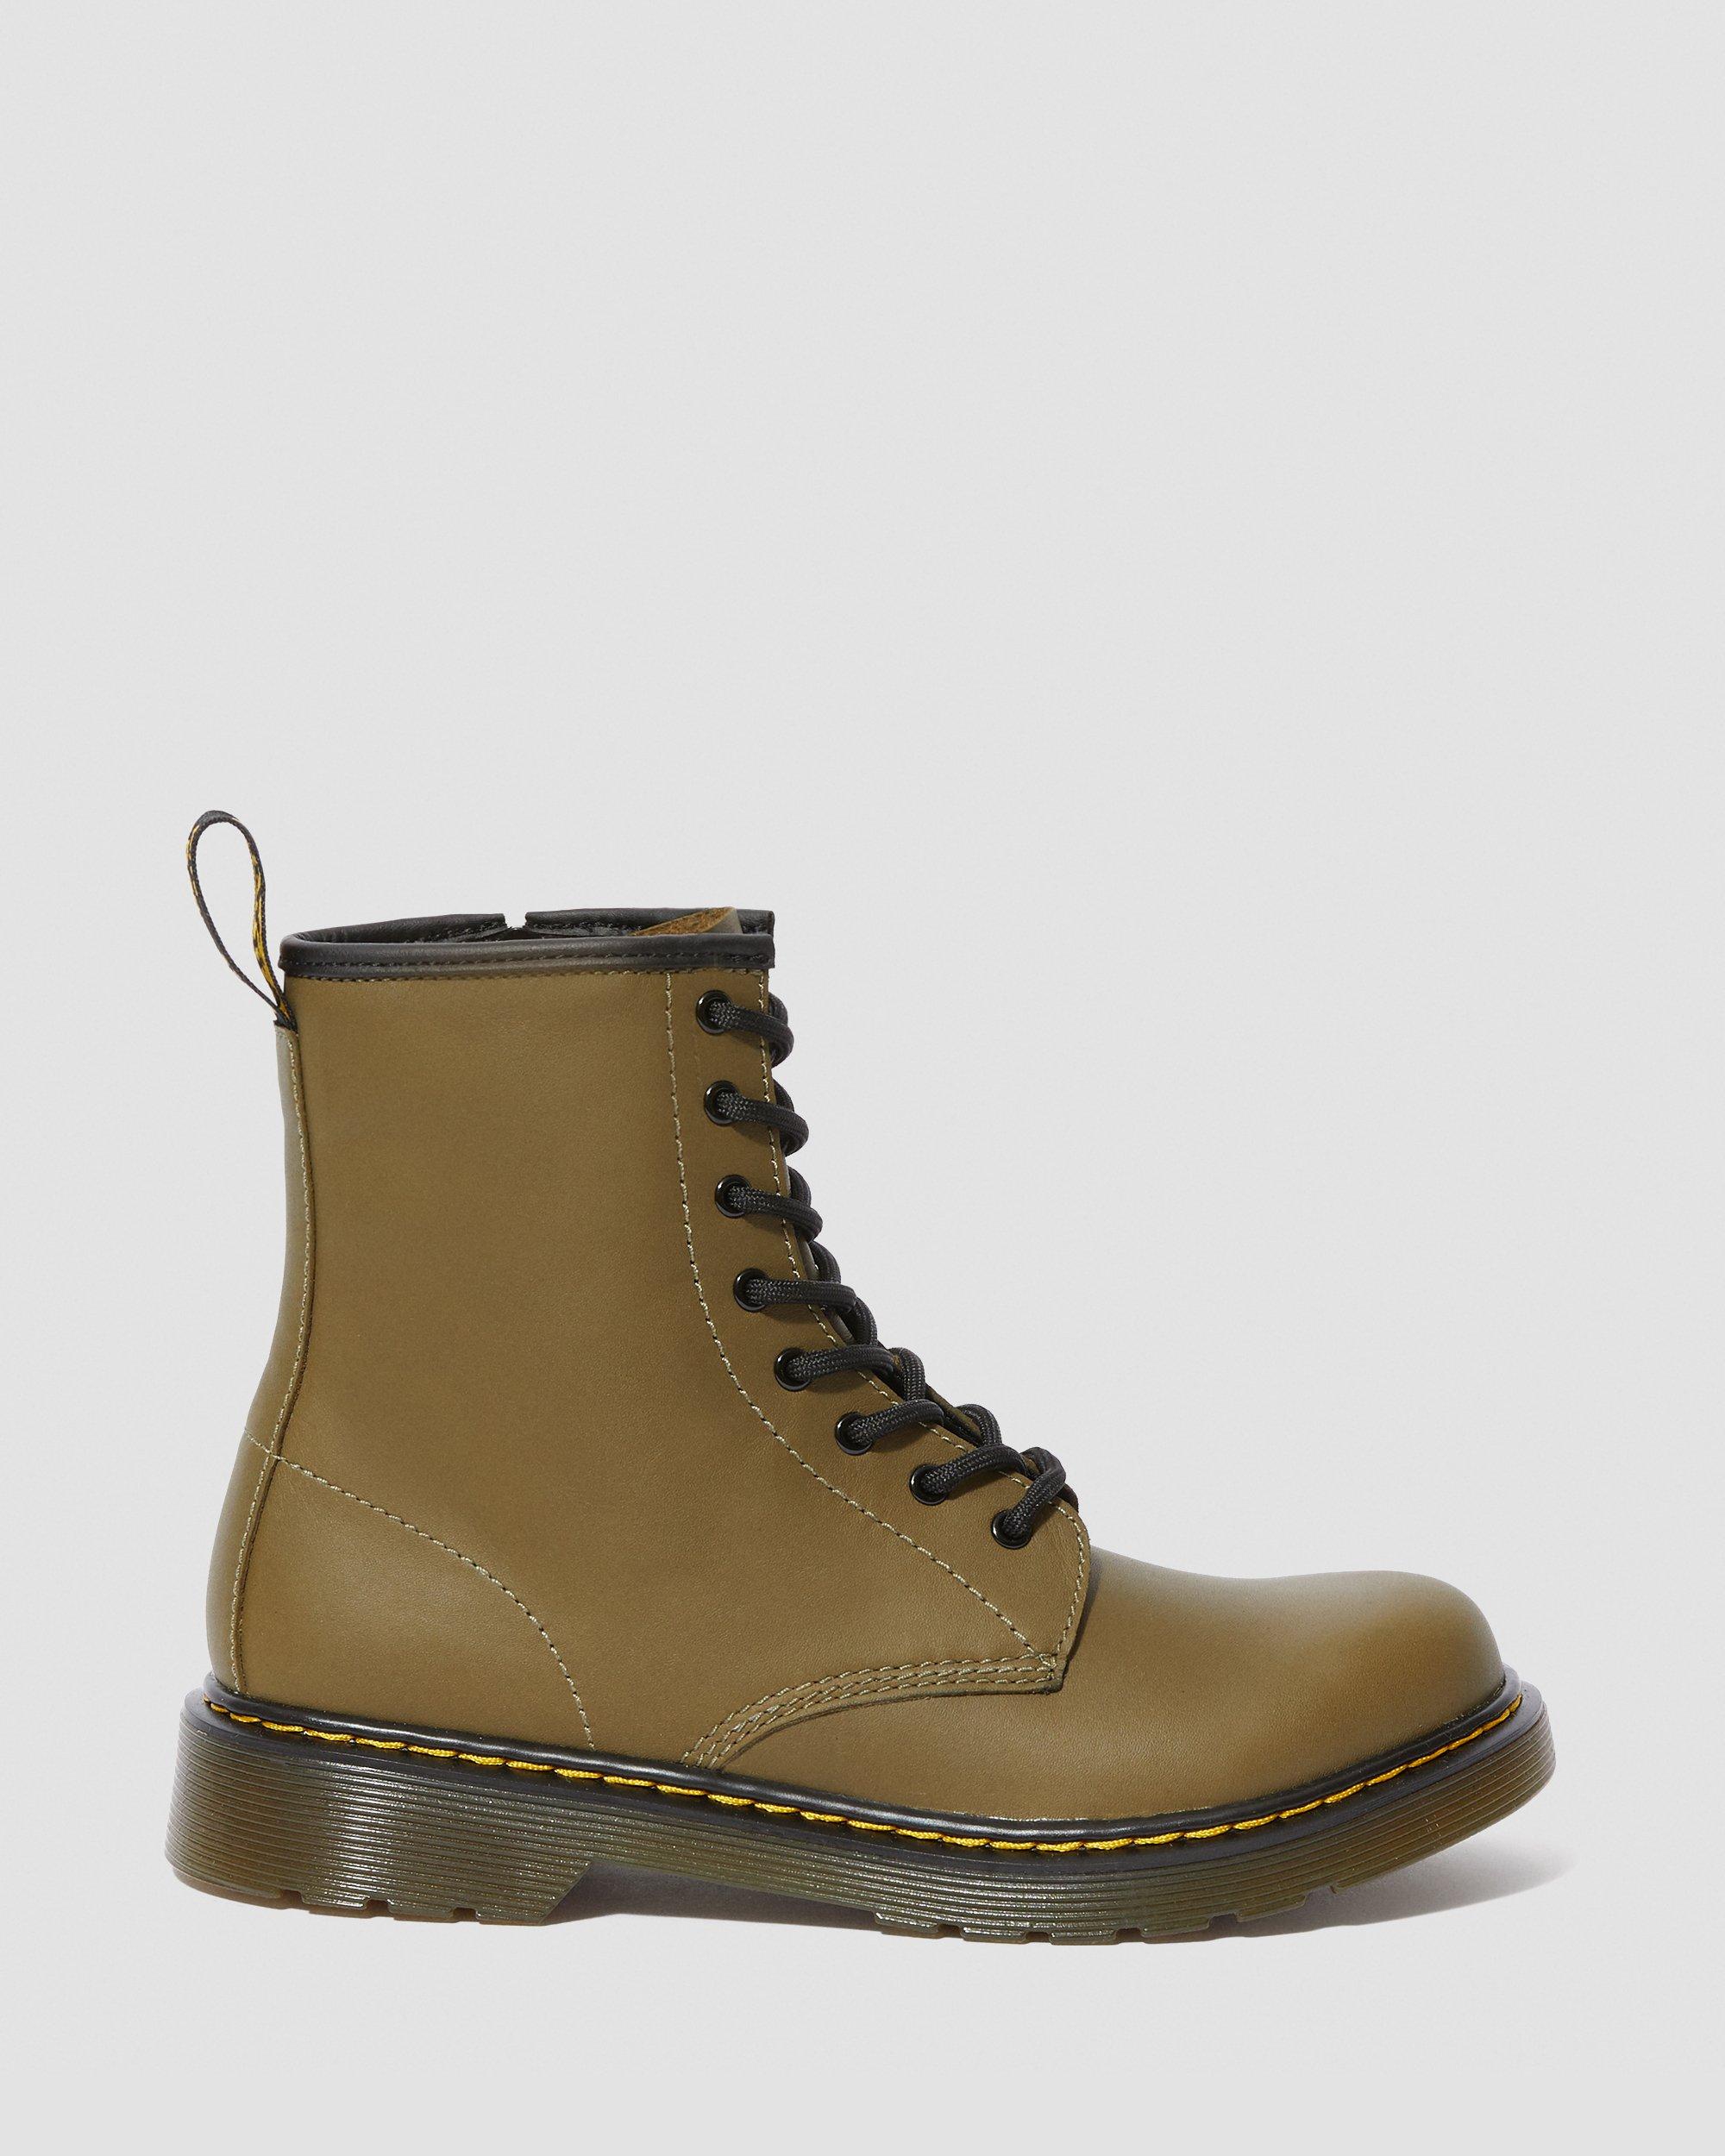 Leather 1460 Up Olive in Boots Dr. Lace | Martens Youth